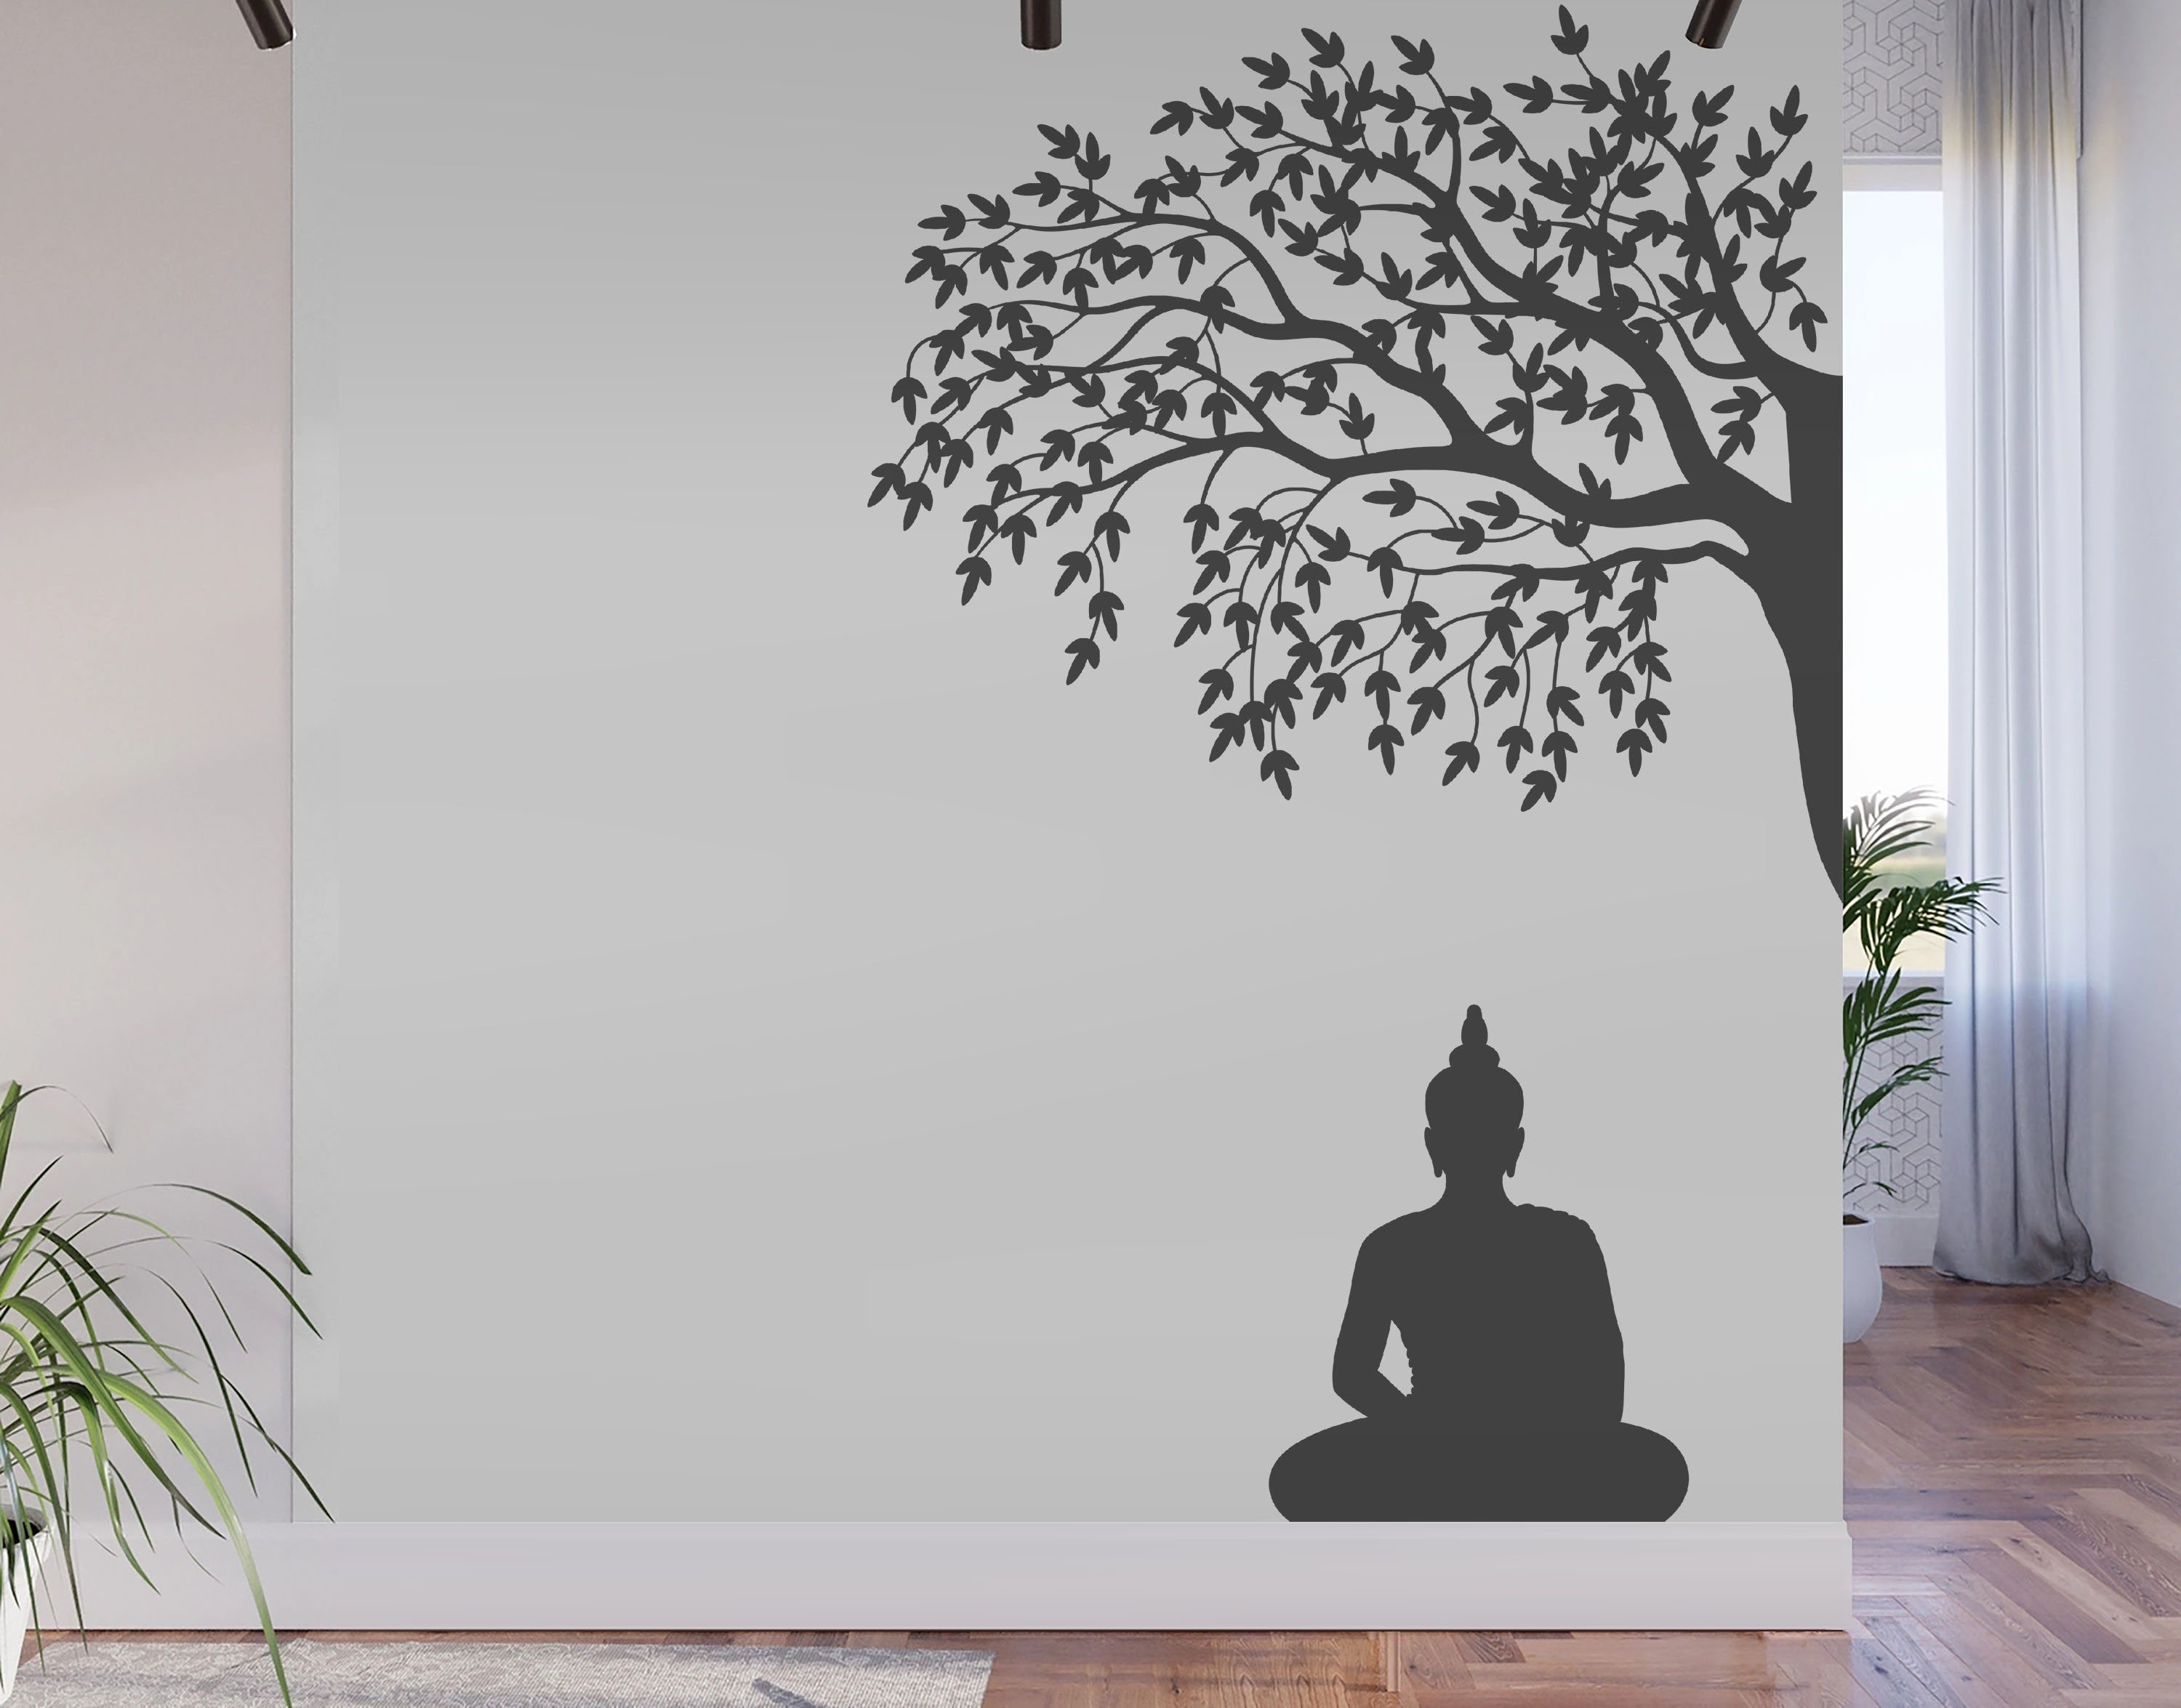 60+ Ways To Create A Zen And Divine Ambiance In Your Home With WallDesign's  Spiritual Wall Stickers – WallDesign